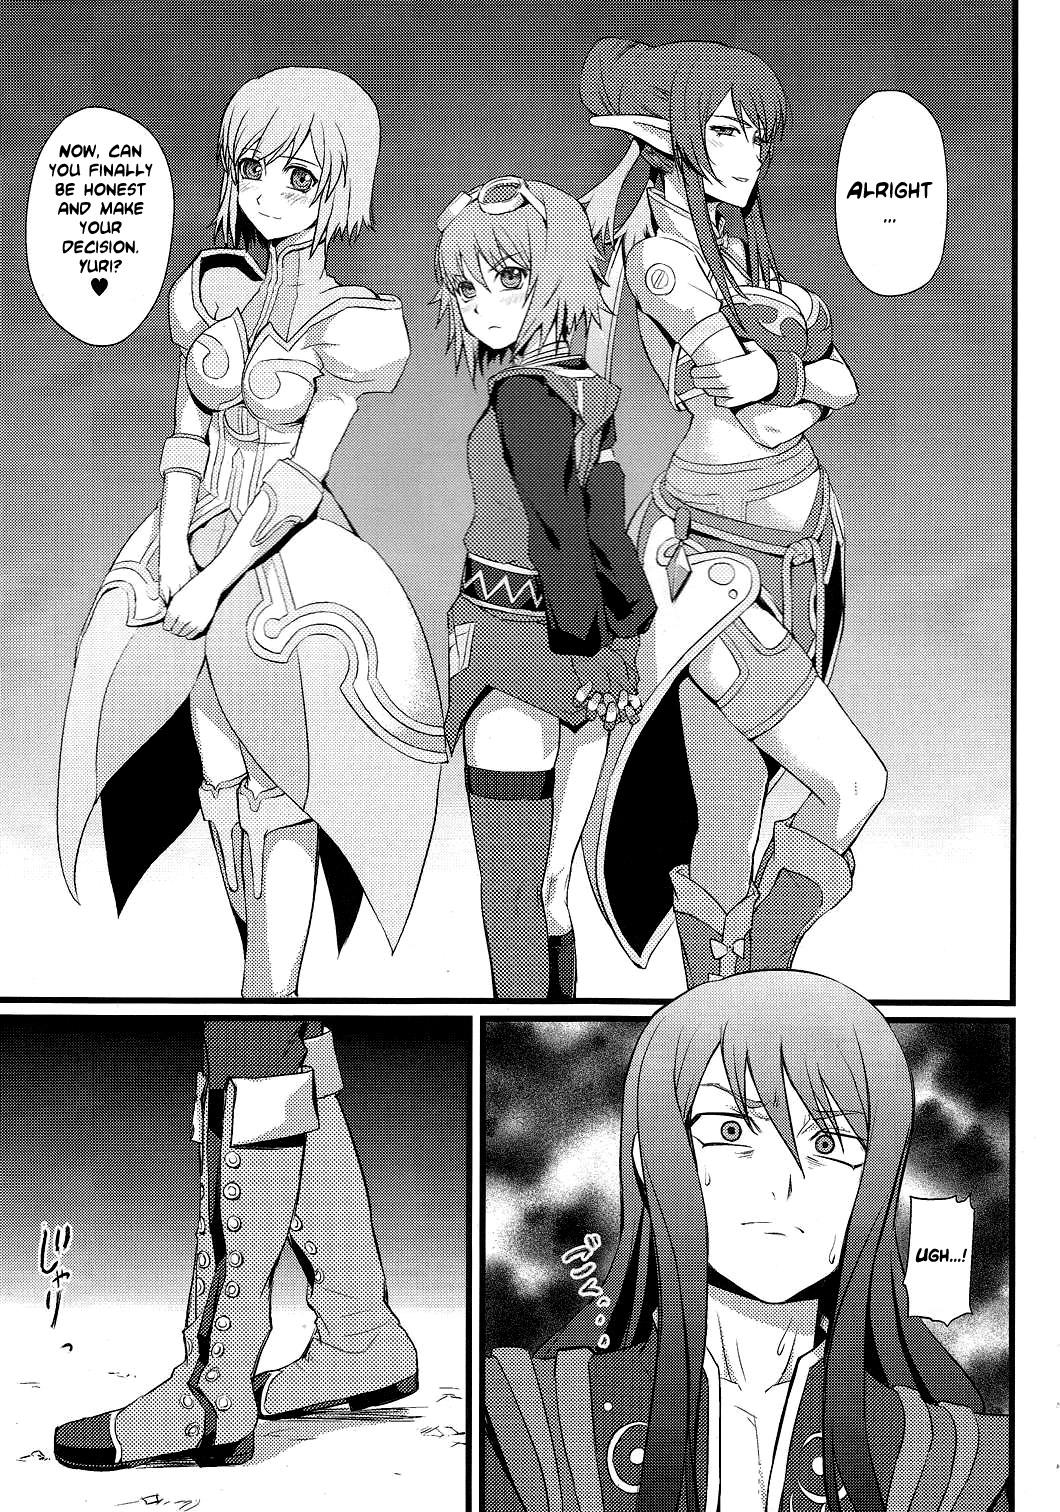 Cop Strike! Army of Beauties - Tales of vesperia Stripping - Page 4